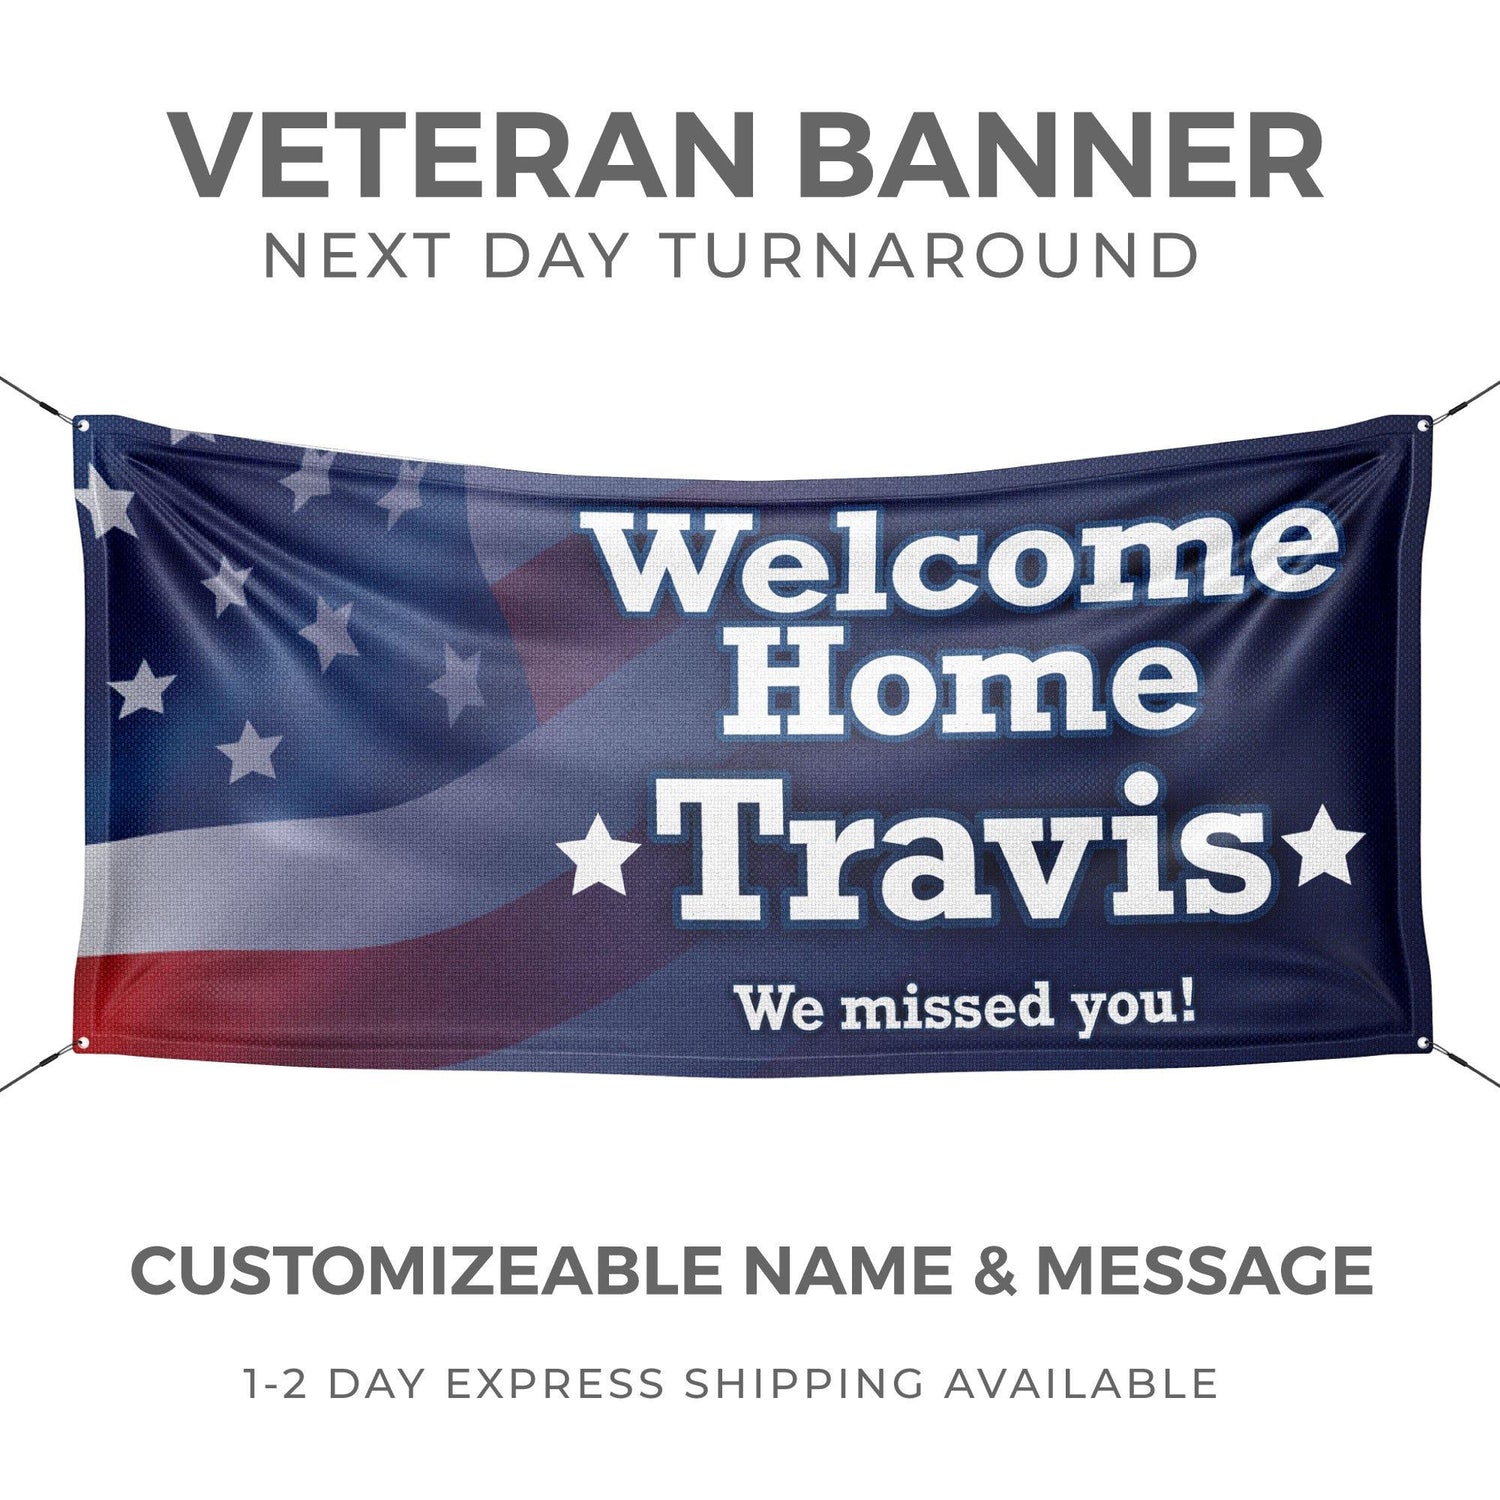 Welcome Home Veterans Banner With Image - HomeHaps